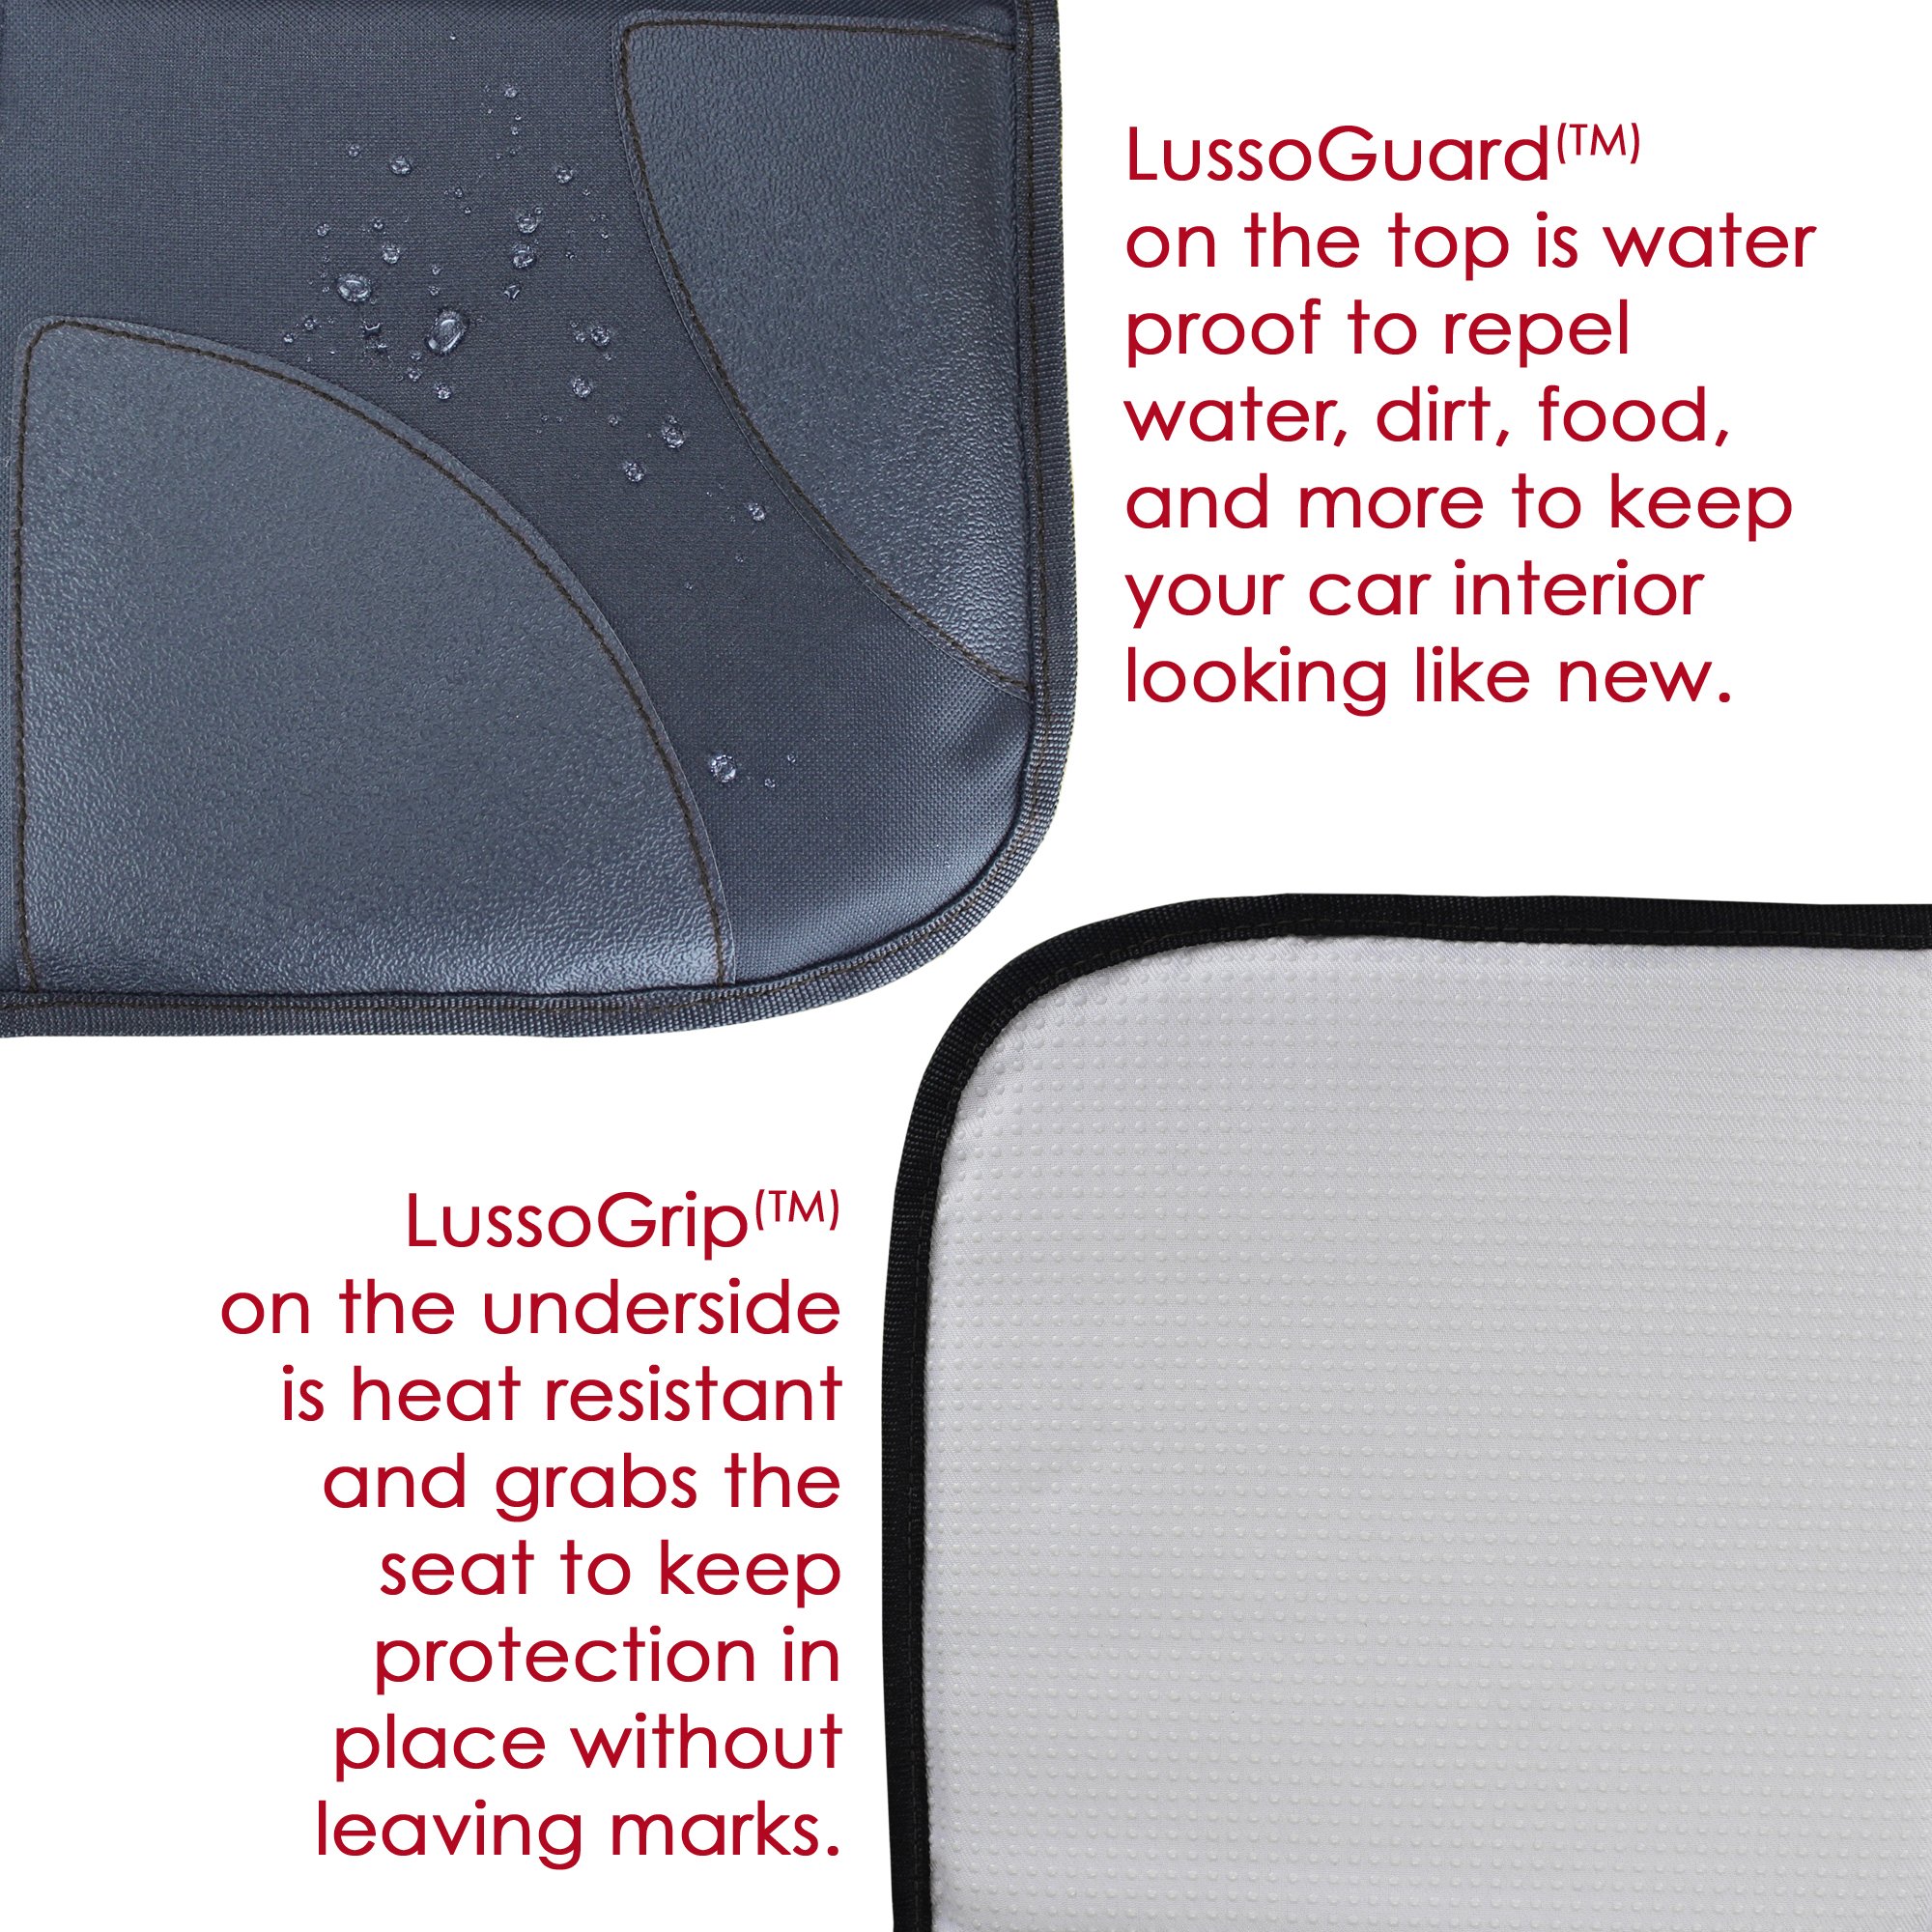 Lusso Gear Car Seat Protector (Black) + Baby Backseat Mirror for Car (Black), Waterproof, Protects Fabric or Leather Seats, Premium Oxford Fabric, Travel Essentials